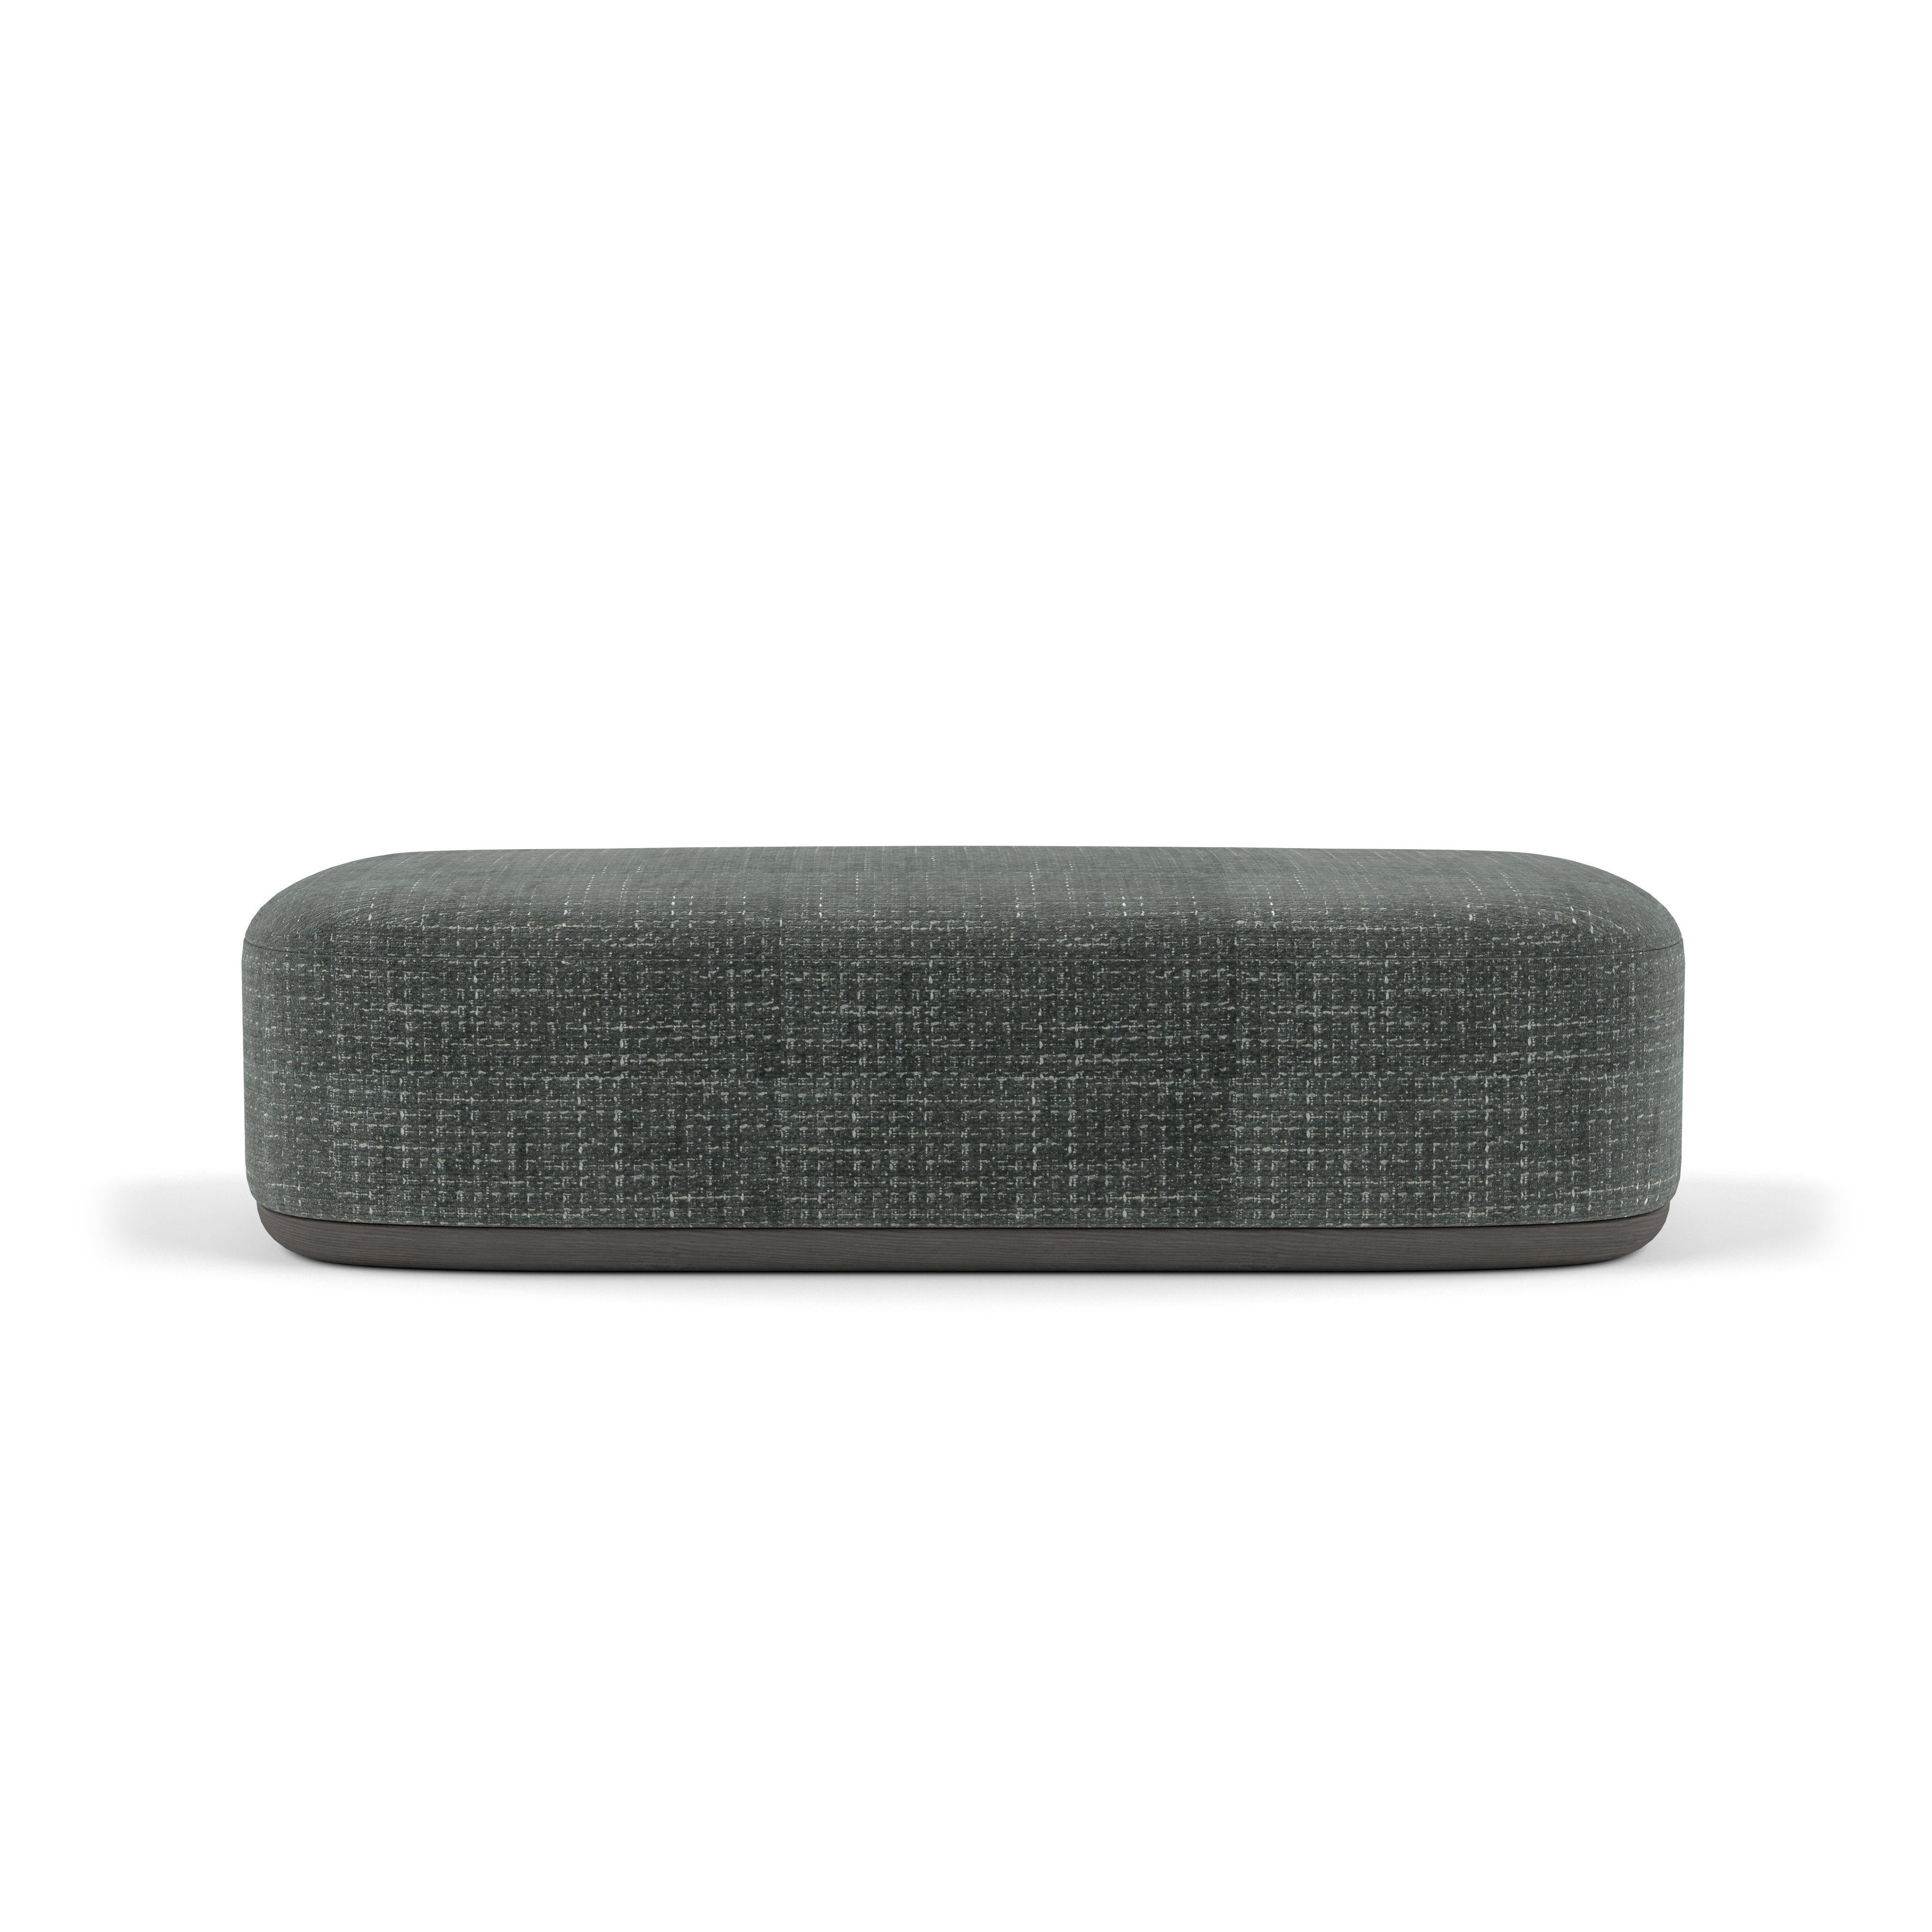 Unio Bench by Poiat 
Designers: Timo Mikkonen & Antti Rouhunkoski 

Collection UNIO 2023

Dimensions: H. 40 x W. 150 D. 72 cm SH. 40 
Model shown: Chivasso Yang 95 Fabric

The Unio Collection, featuring an armchair, ottomans, sofas, marks a new